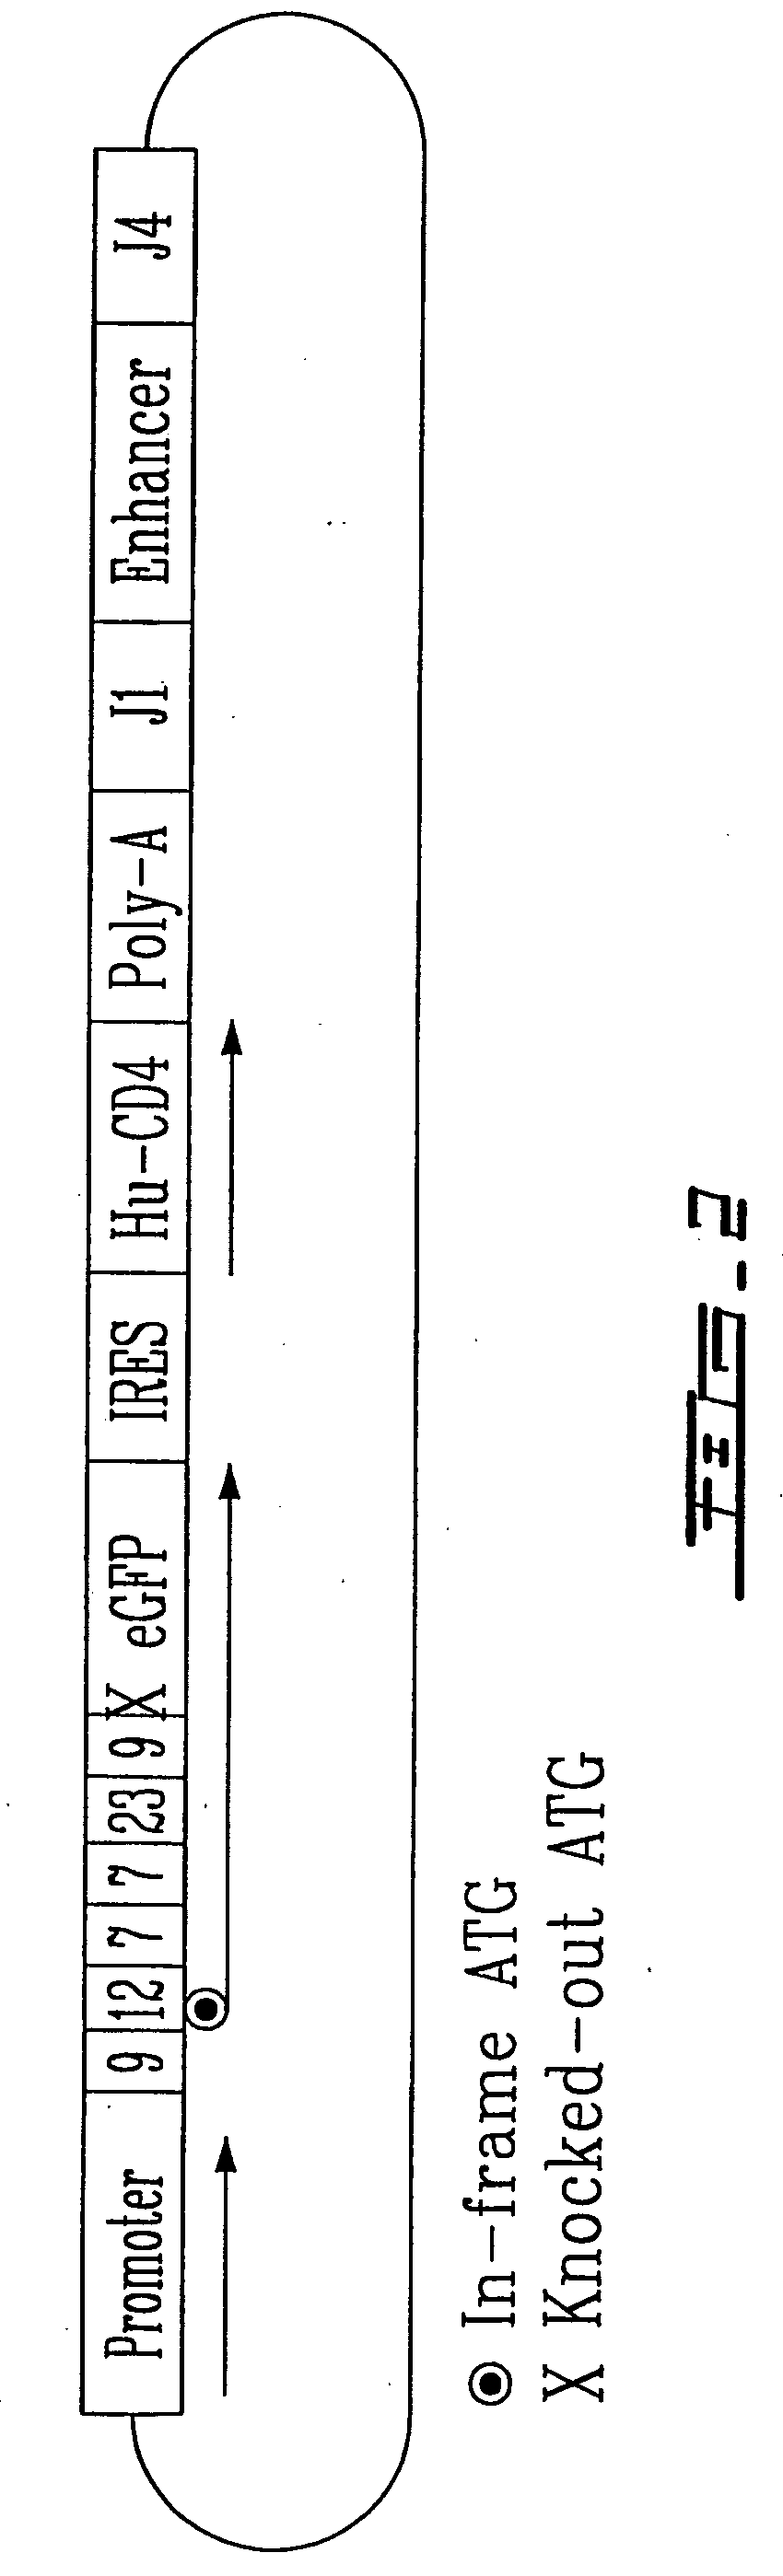 Dna construct for assessing thymic function activity and therapeutical uses thereof